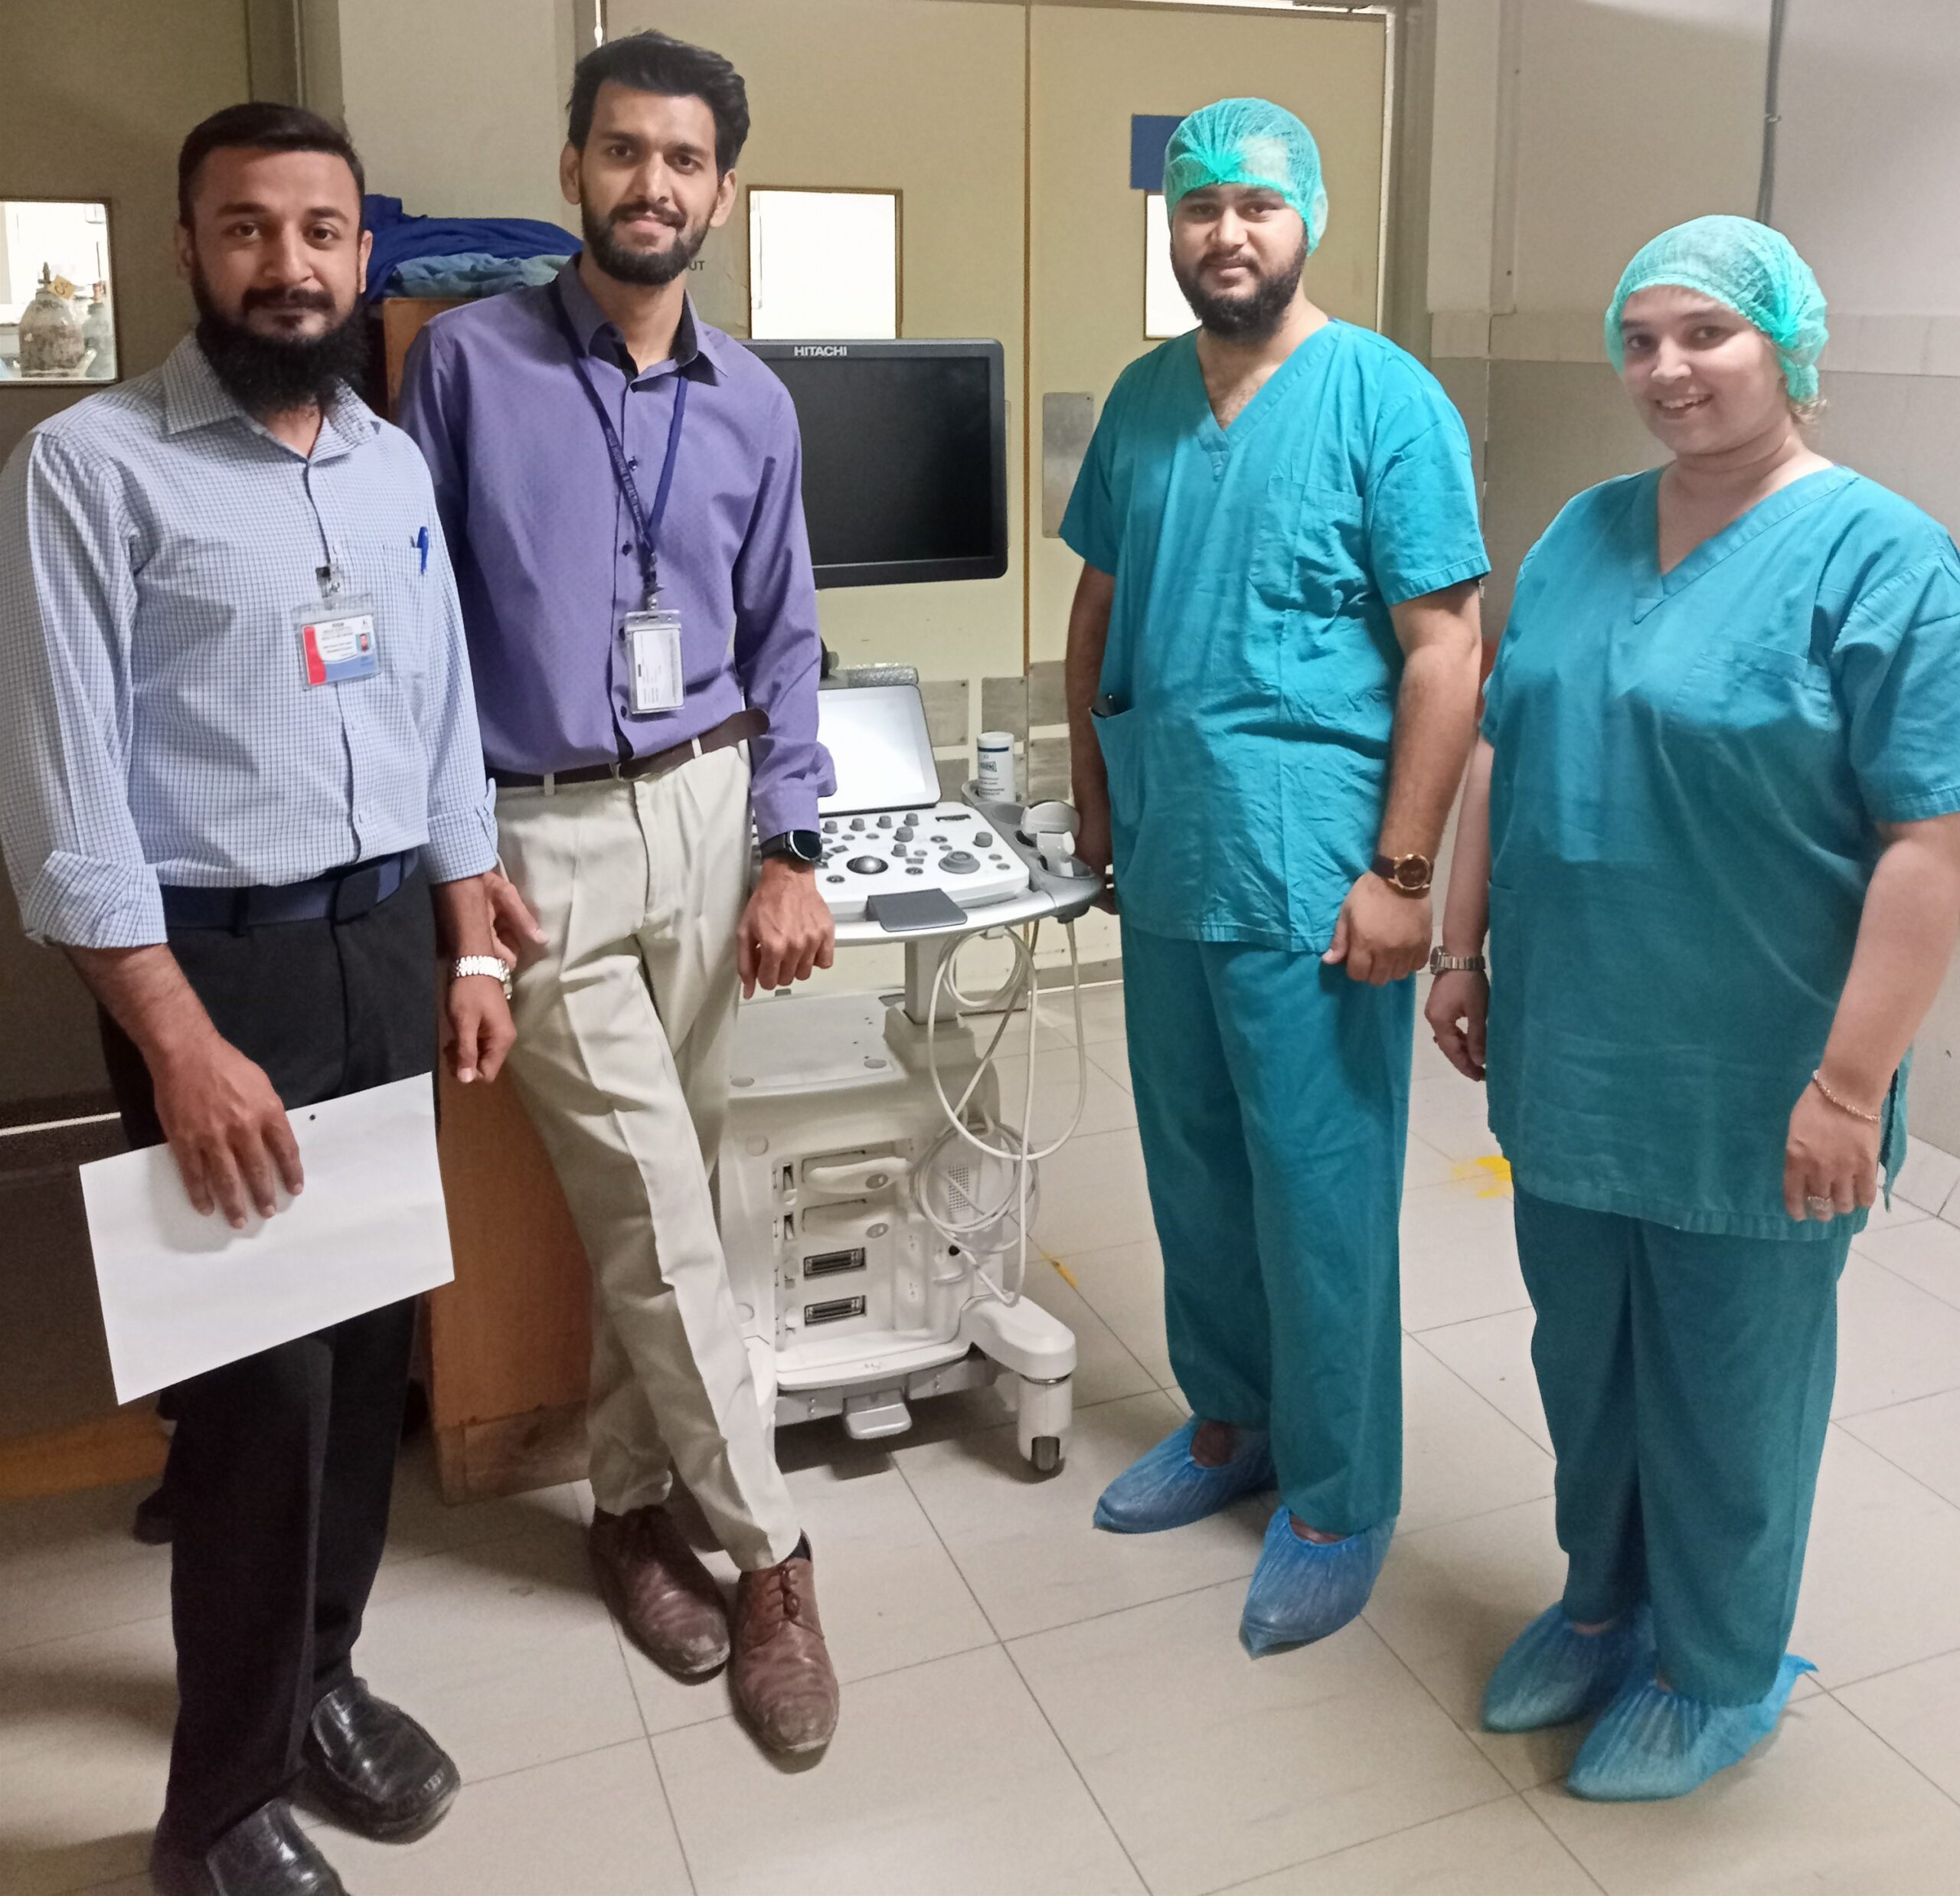 Syeda Ghazia working as a woman medical equipment engineer with colleagues